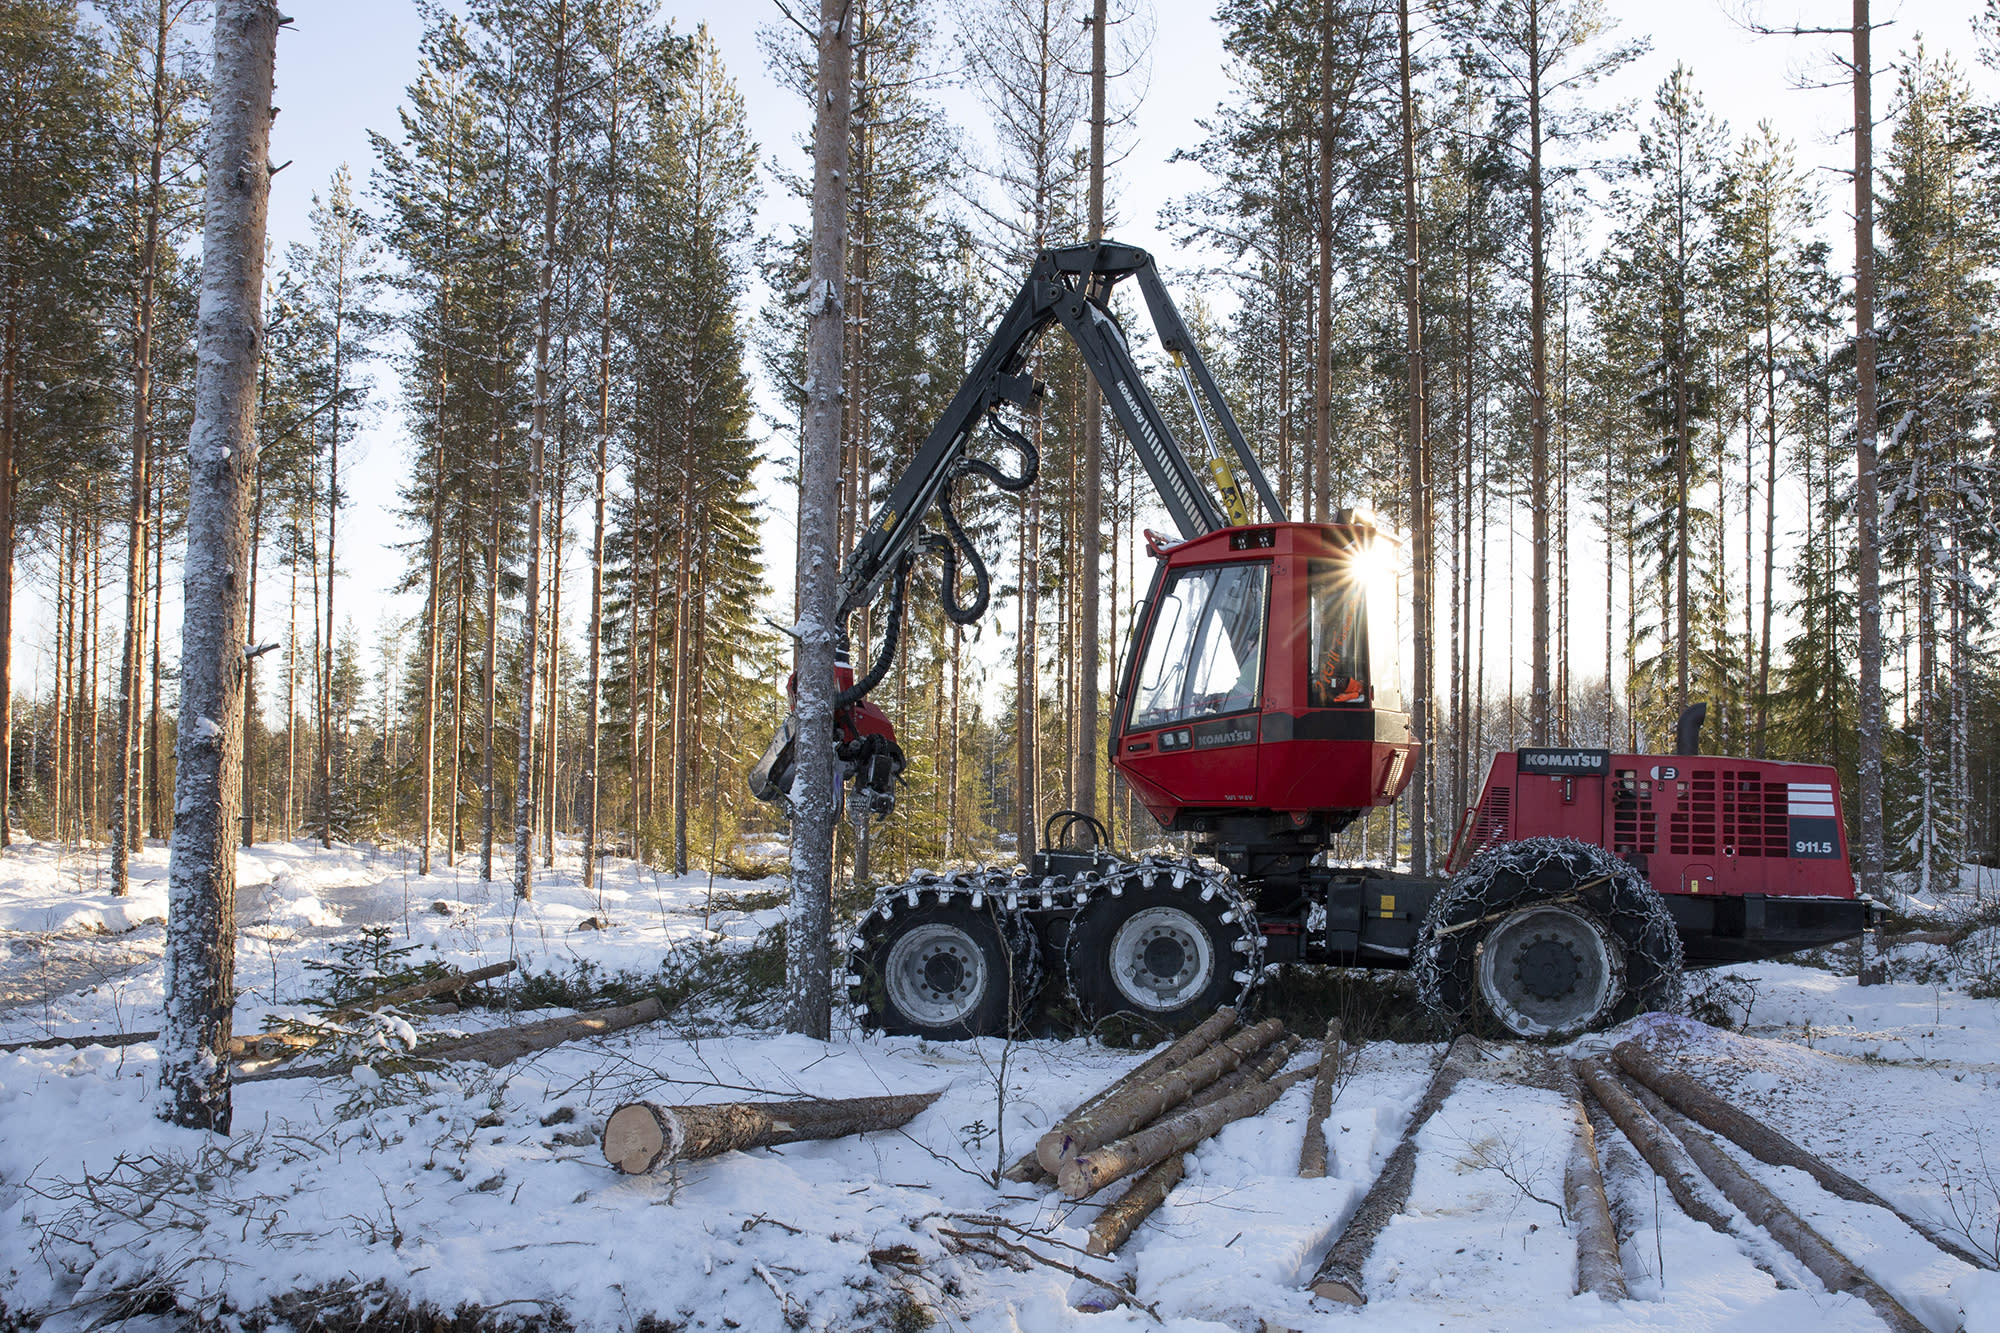 Luke: Finland's carbon neutrality in 2035 can only remain a goal